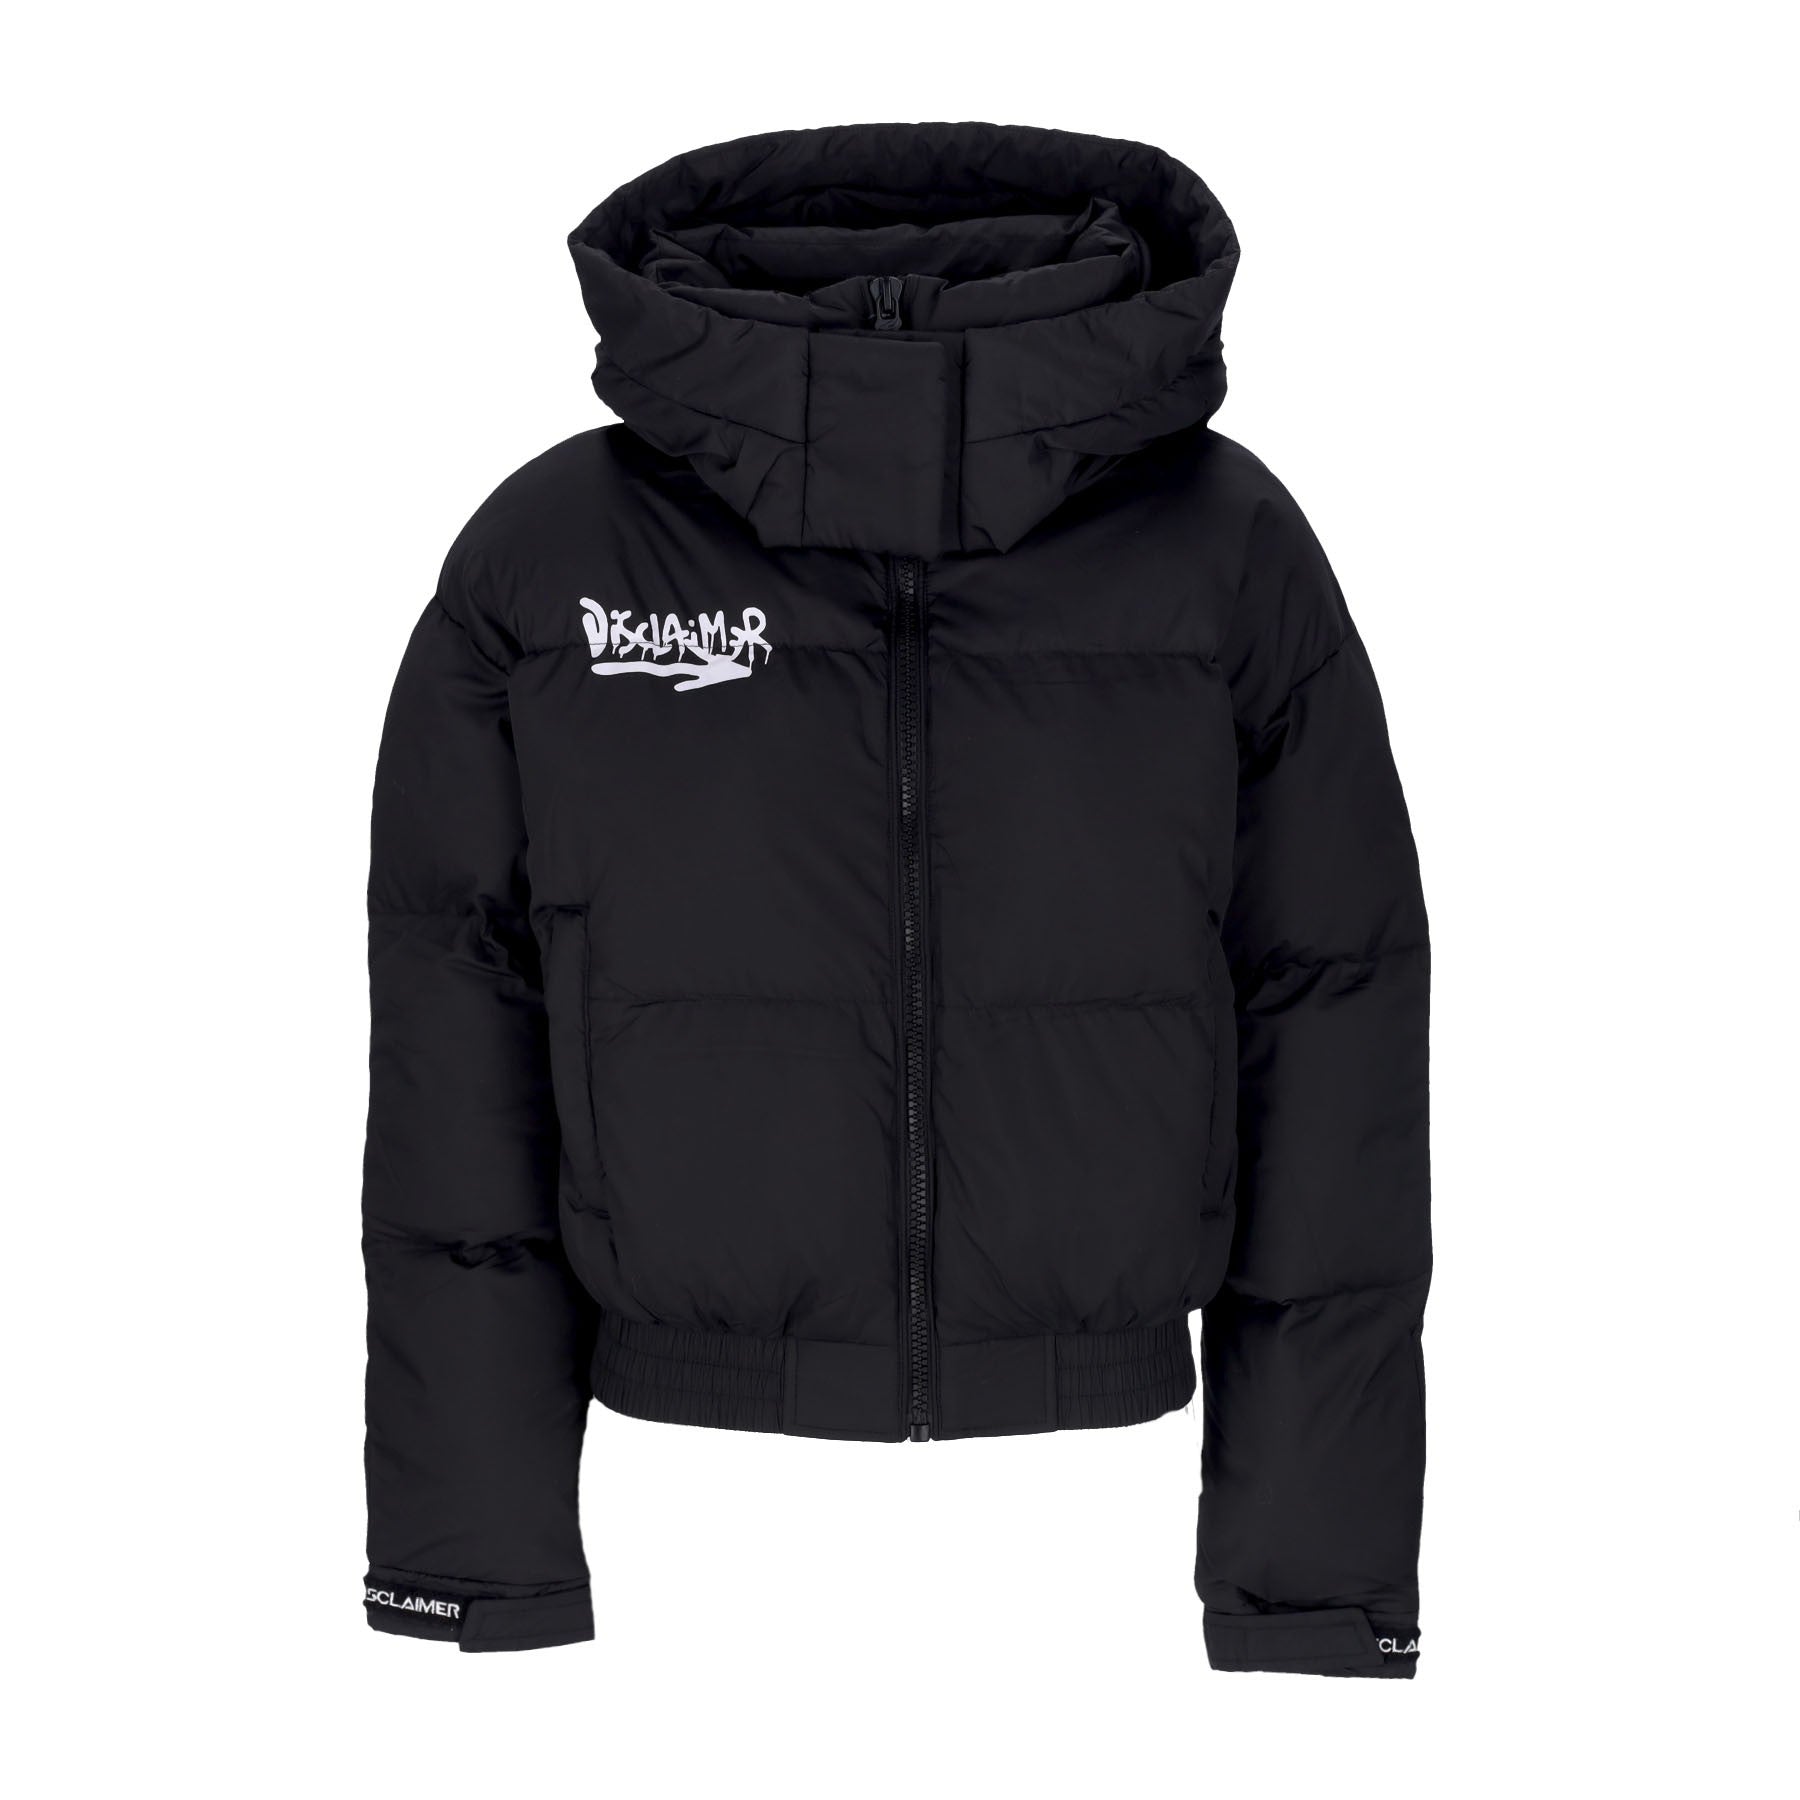 All Right Reserved Women's Padded Jacket Black